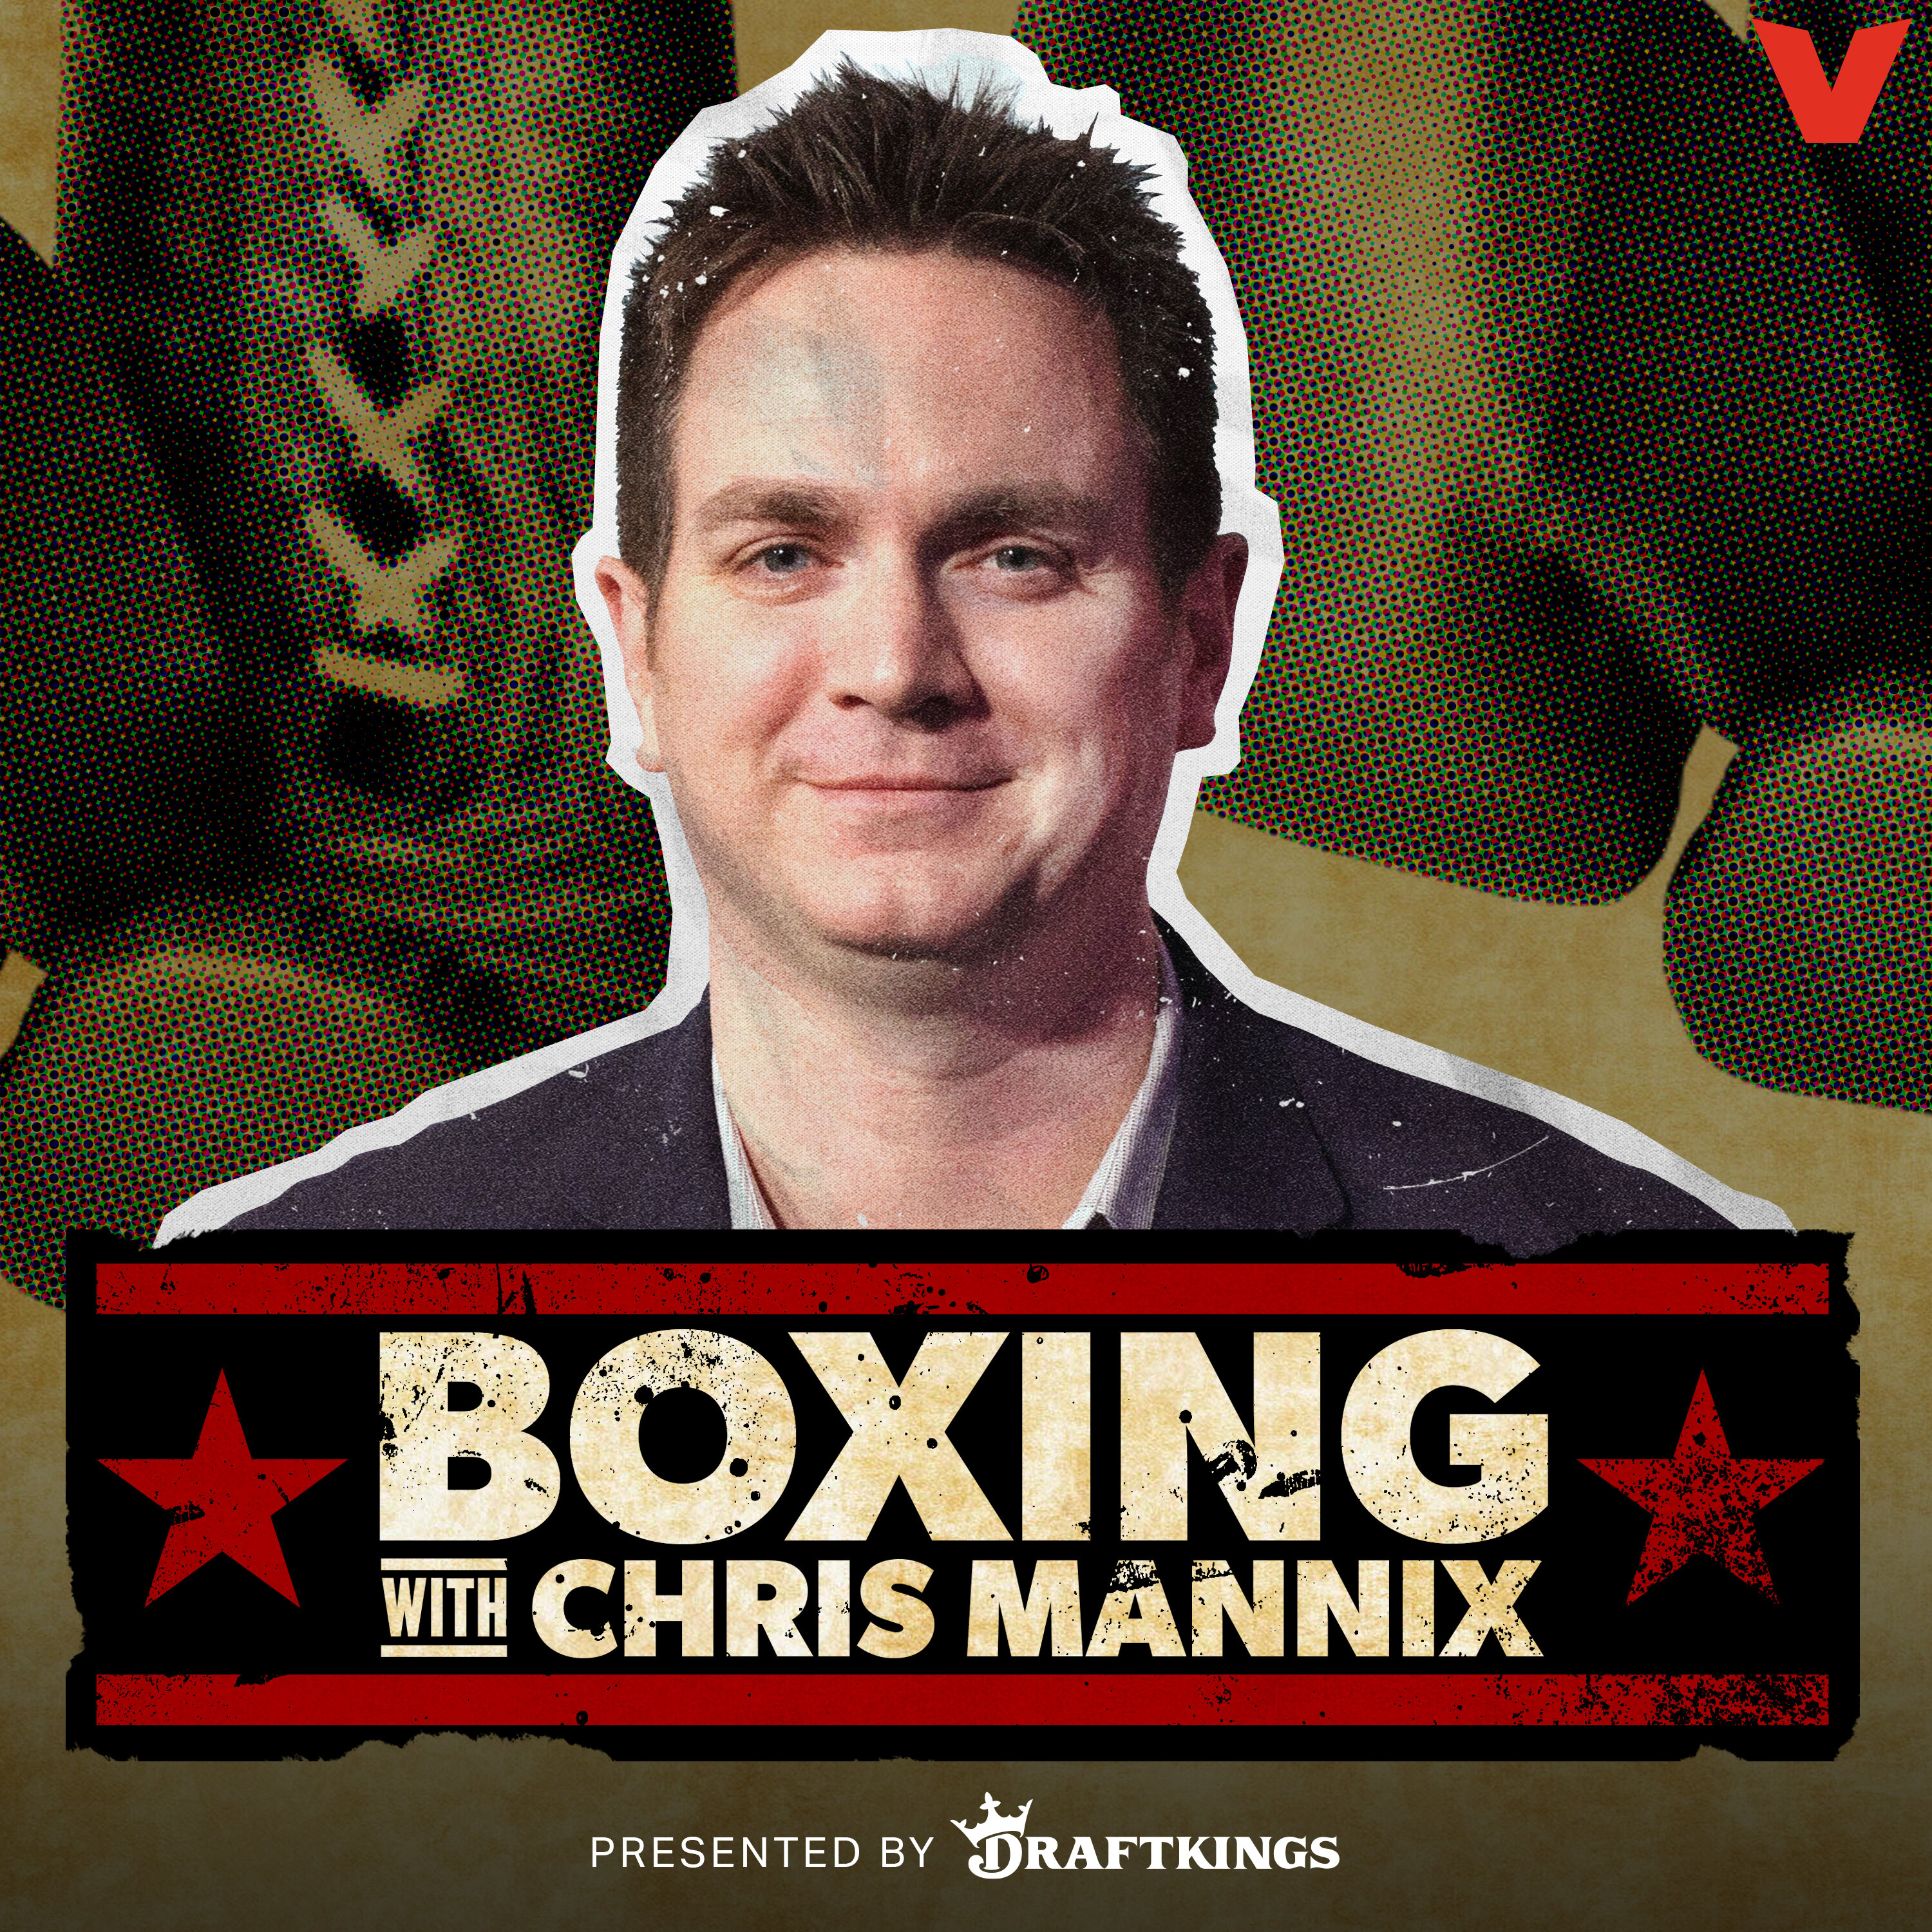 Boxing with Chris Mannix - Canelo’s Response